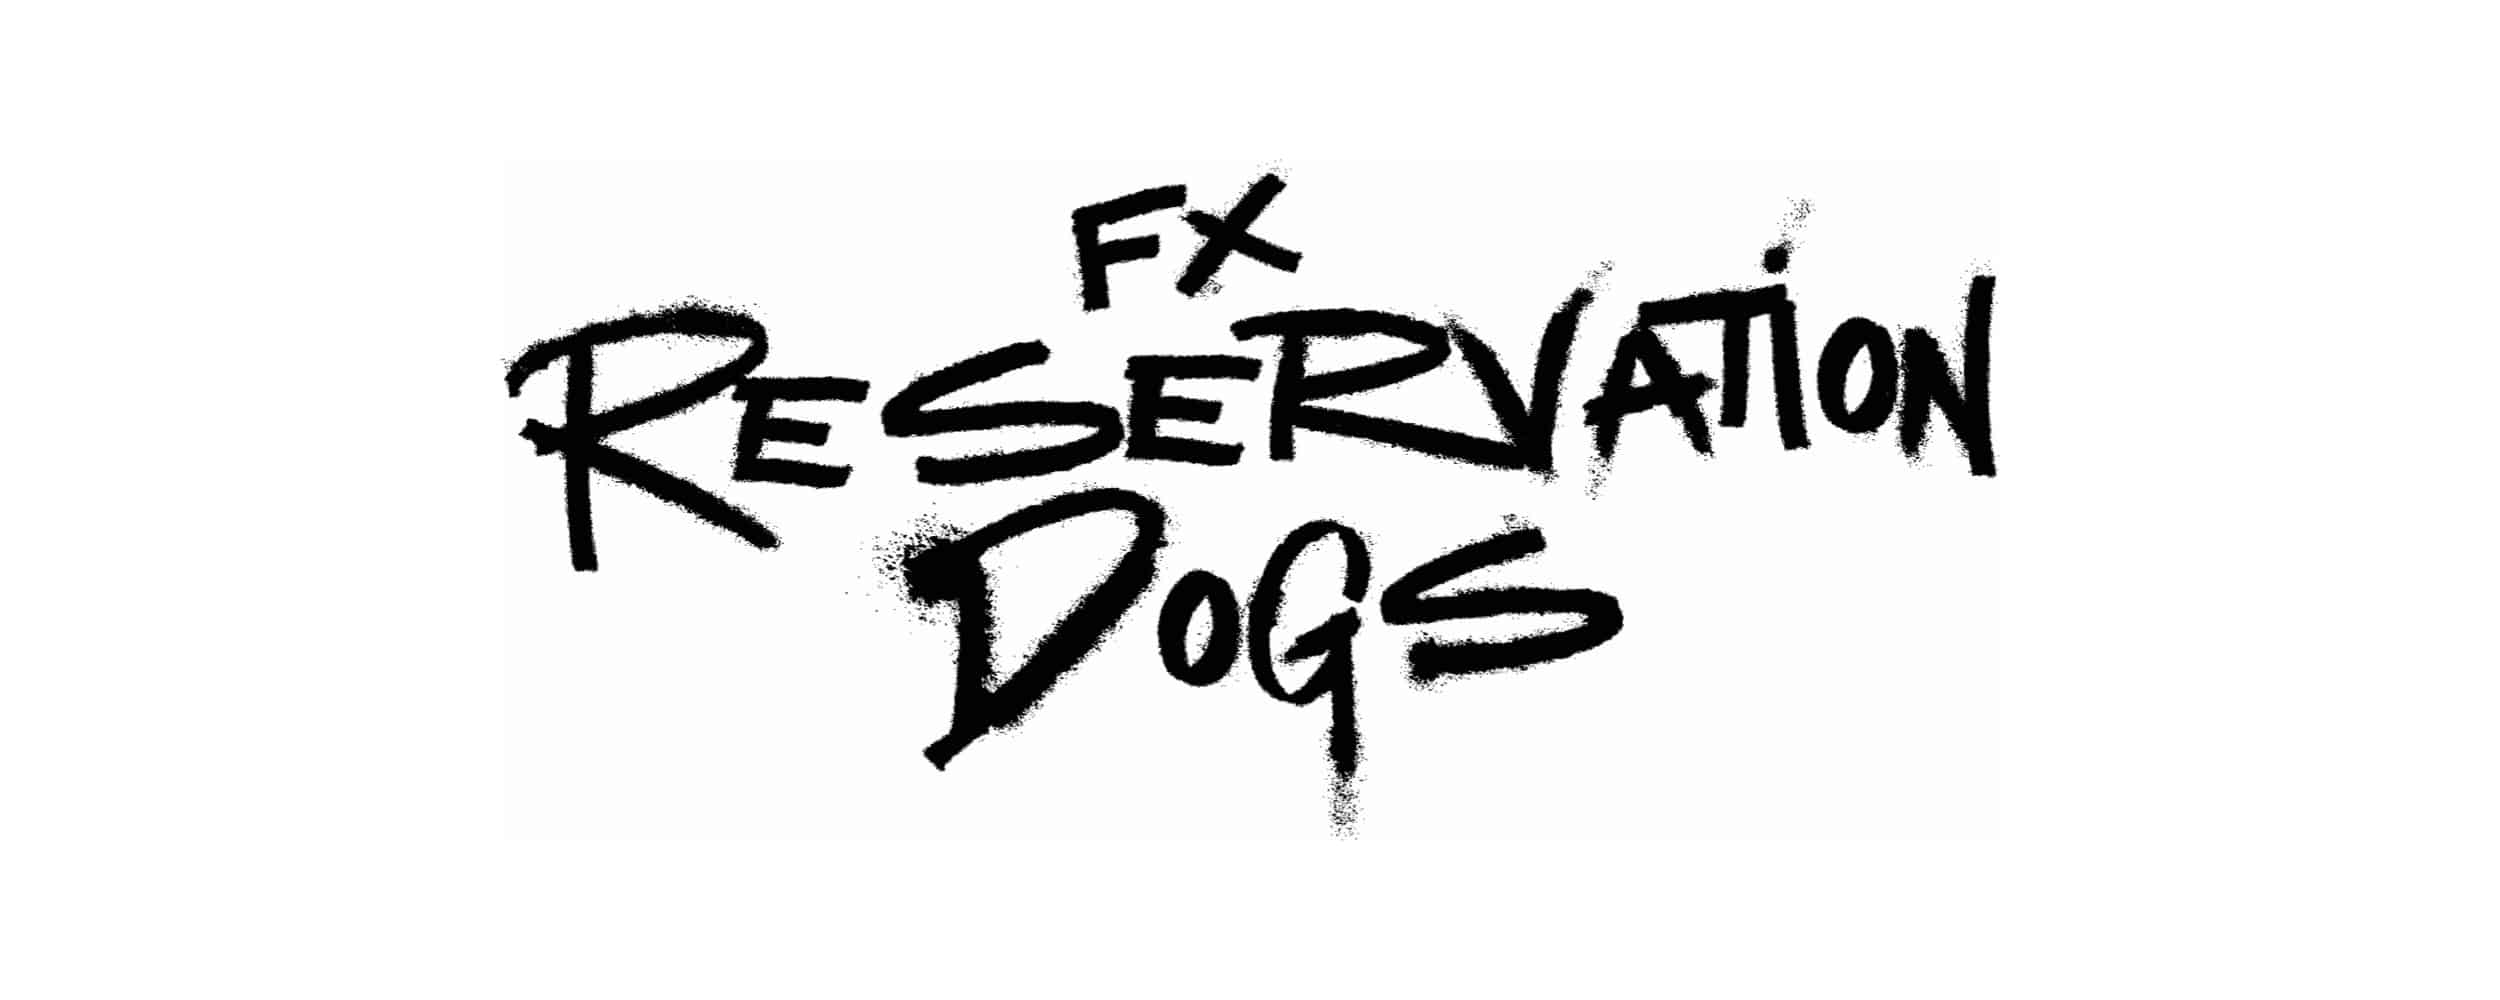 Reservation dogs